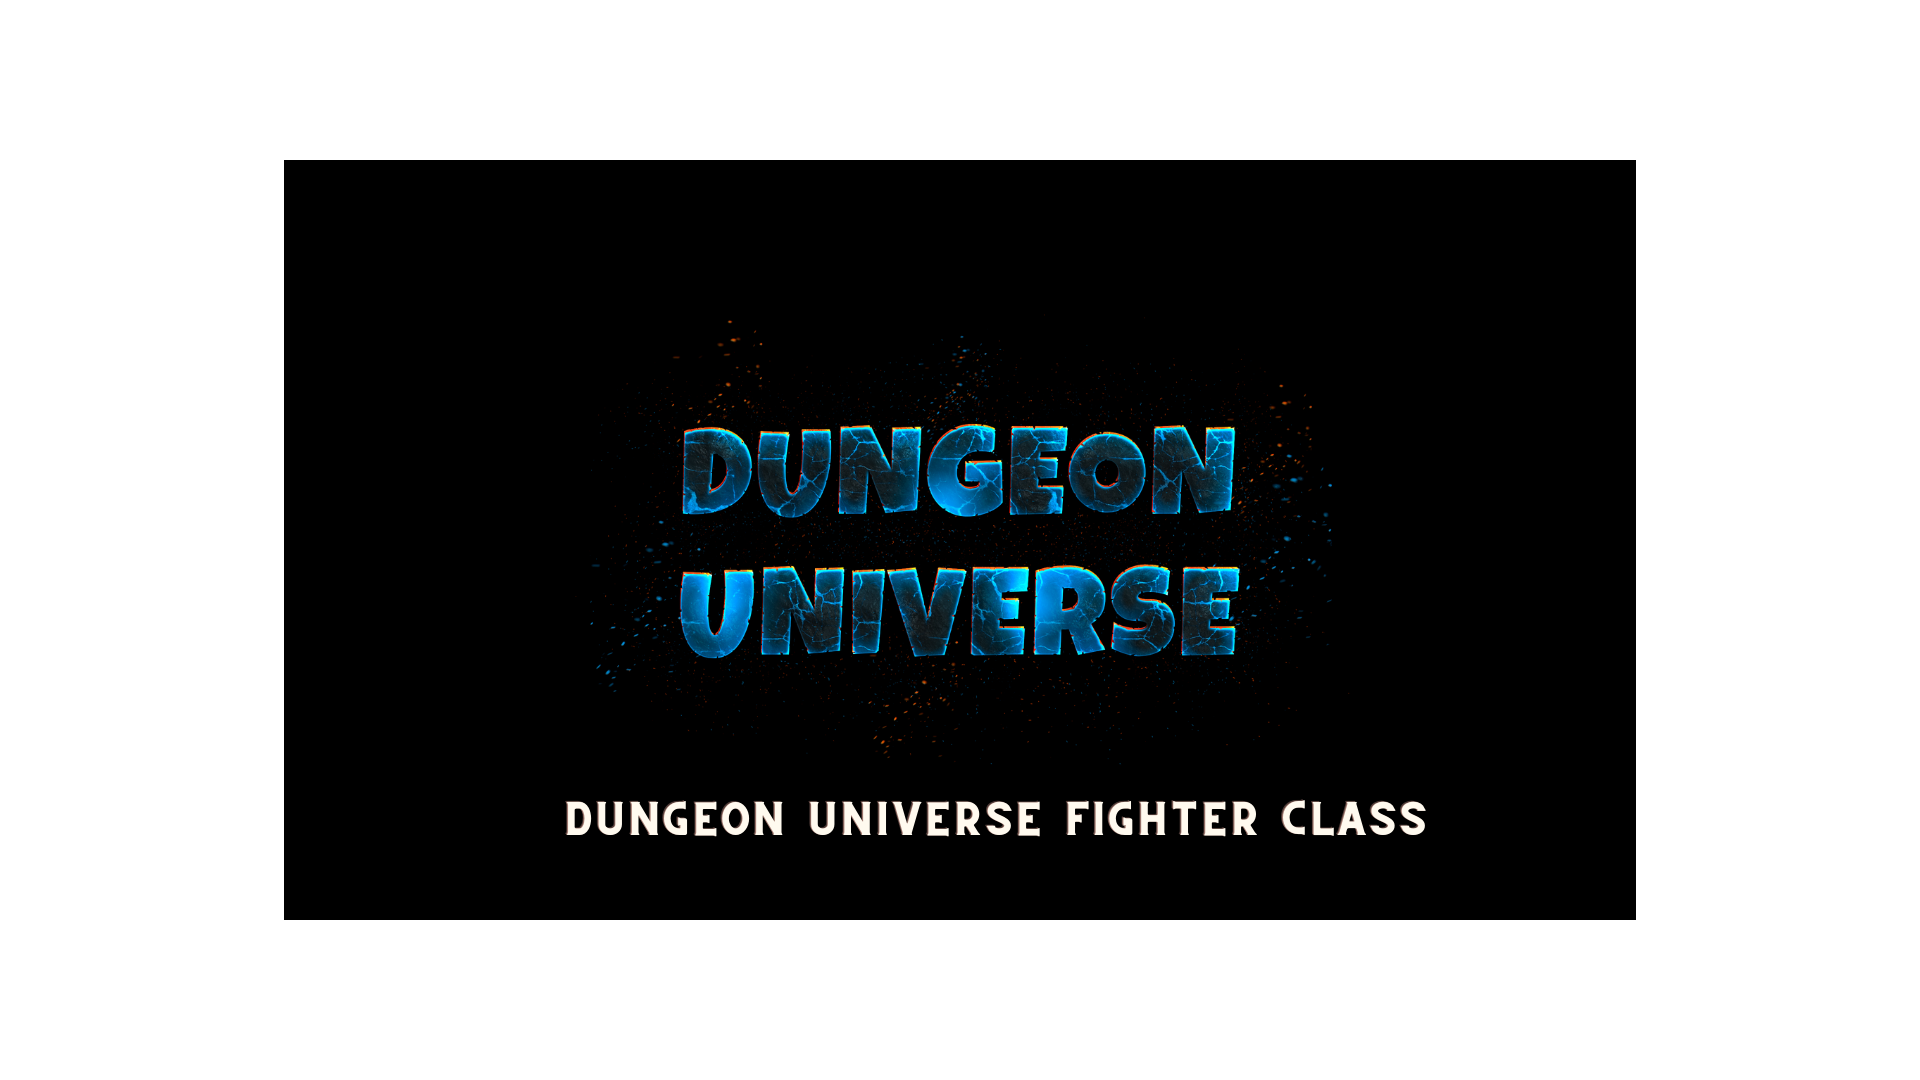 Dungeon Universe Fighter Class